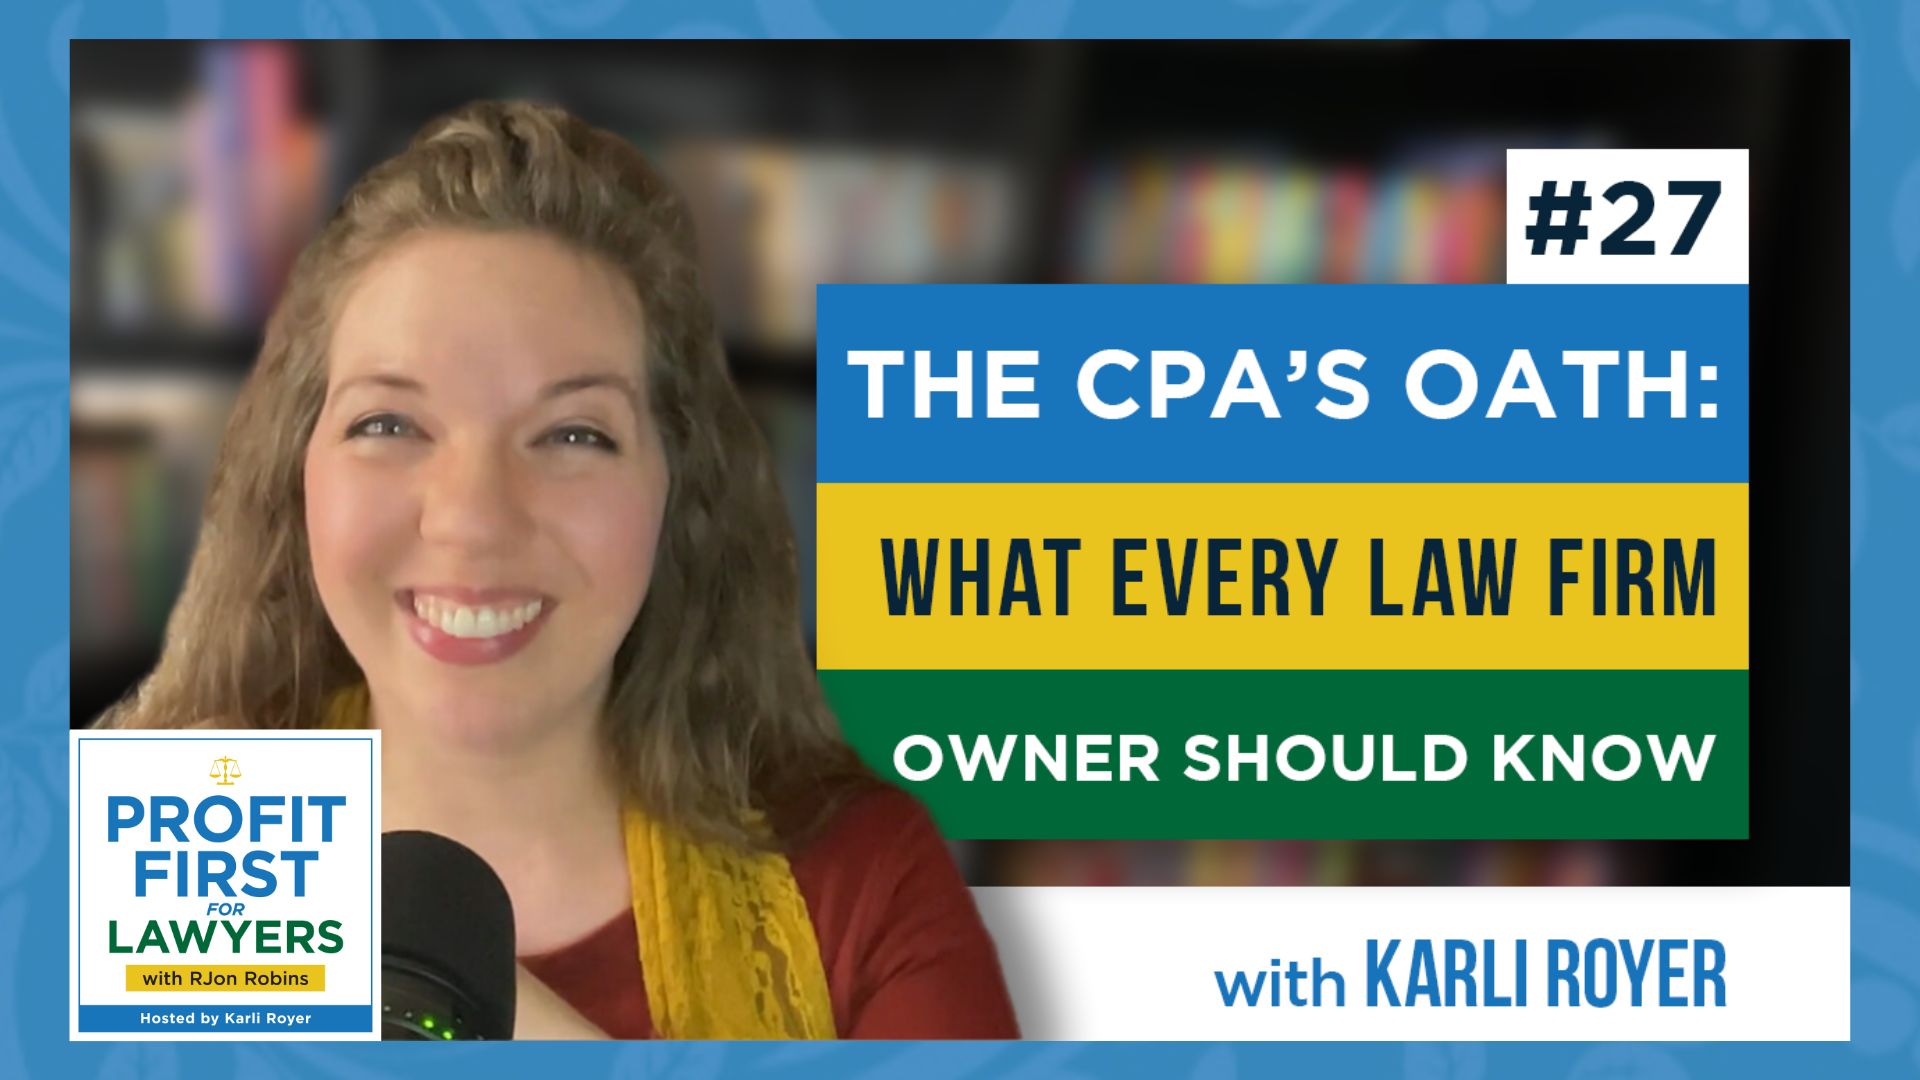 Featured image of Karli Royer for episode 27 of Profit First For Lawyers: The CPA's Oath: What Every Law Firm Owner Should Know